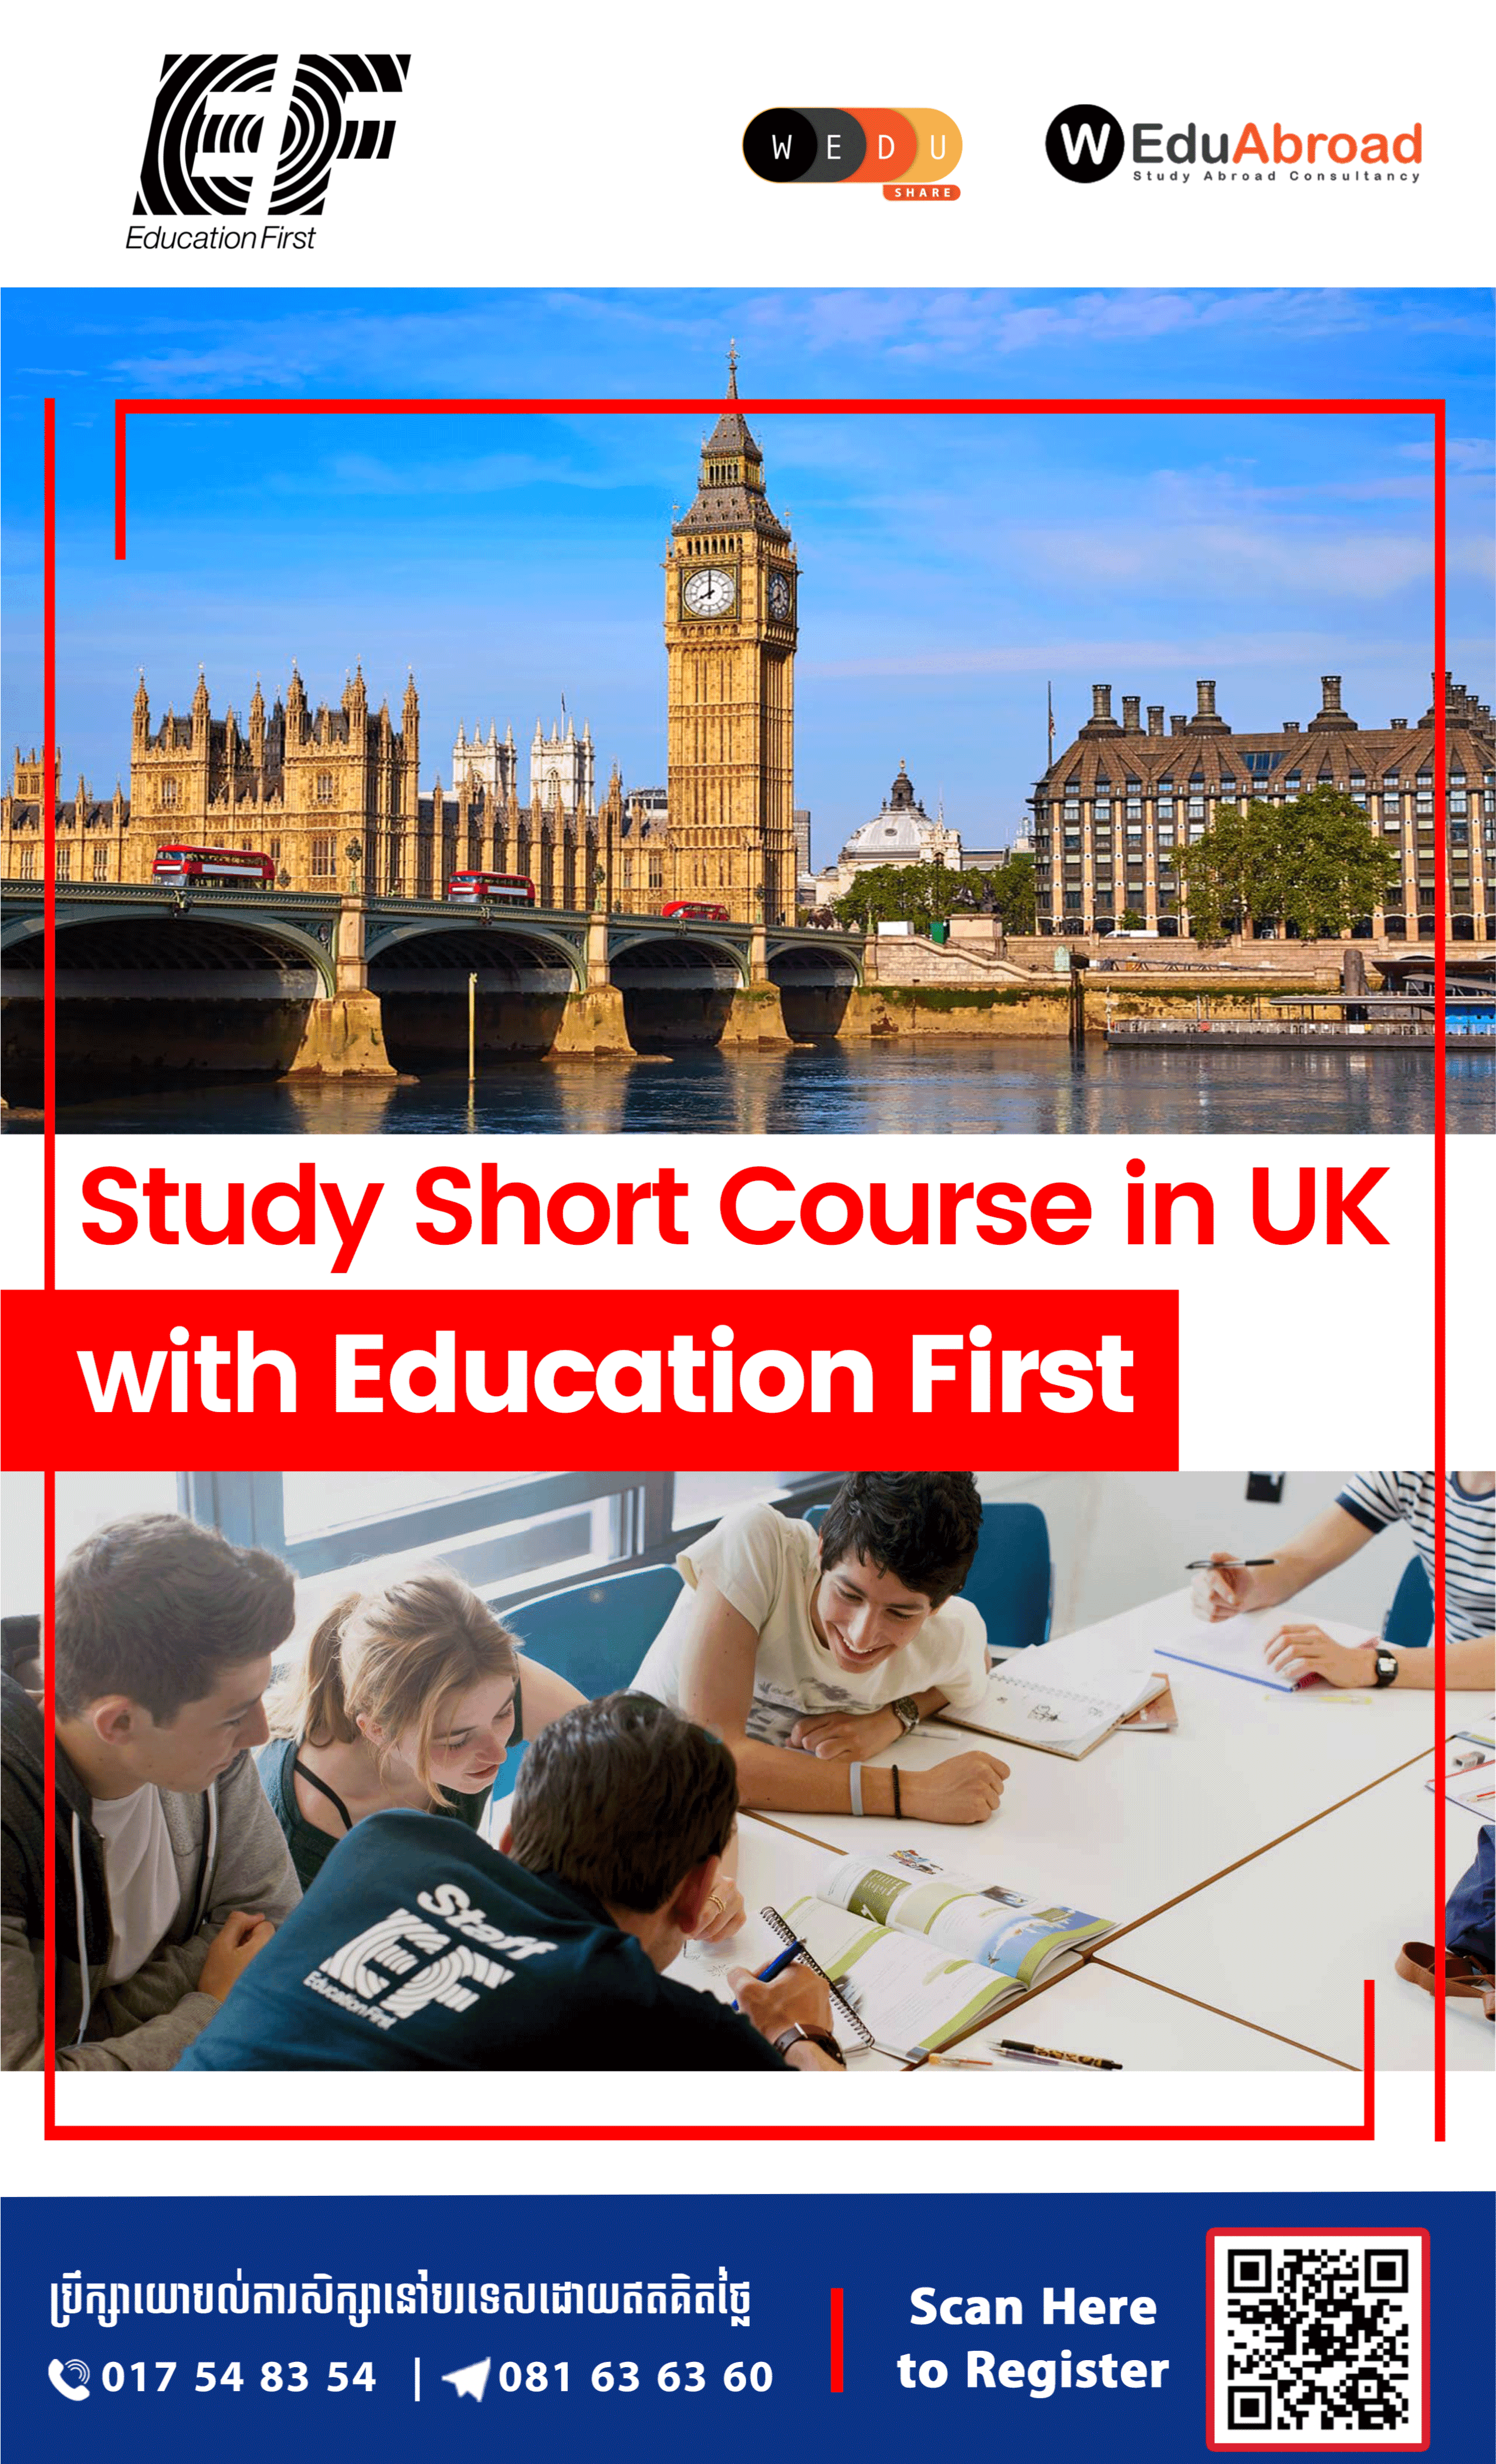 Study Short Course in UK with Education First Flyer